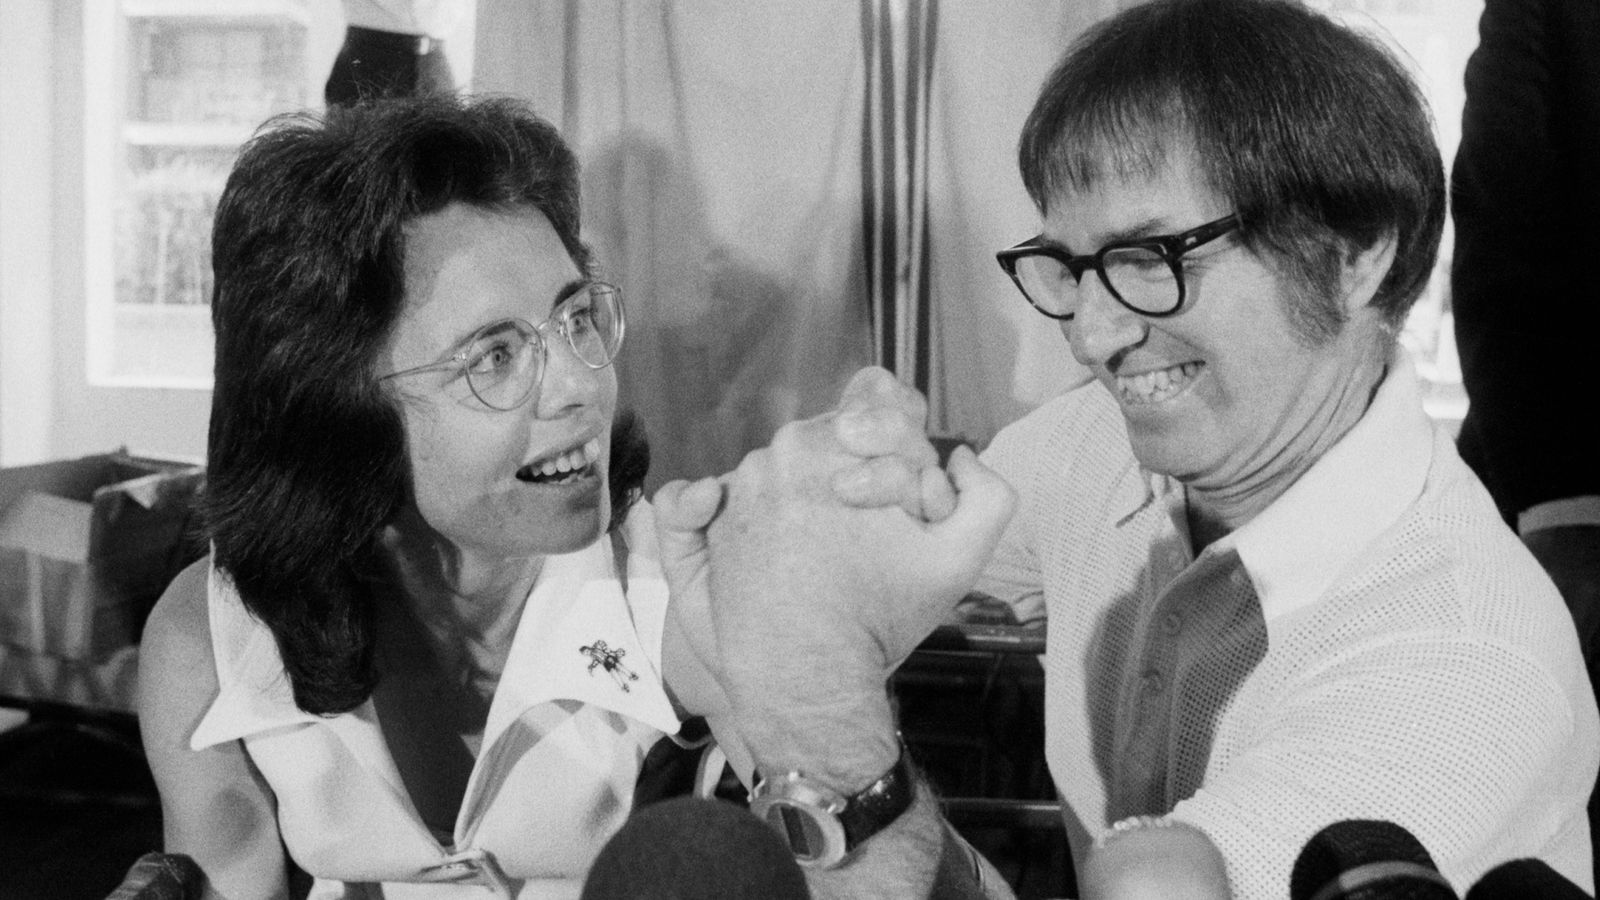 Did Billy Jean King legitimately defeat Bobby Riggs in The Battle of the  Sexes? - Quora